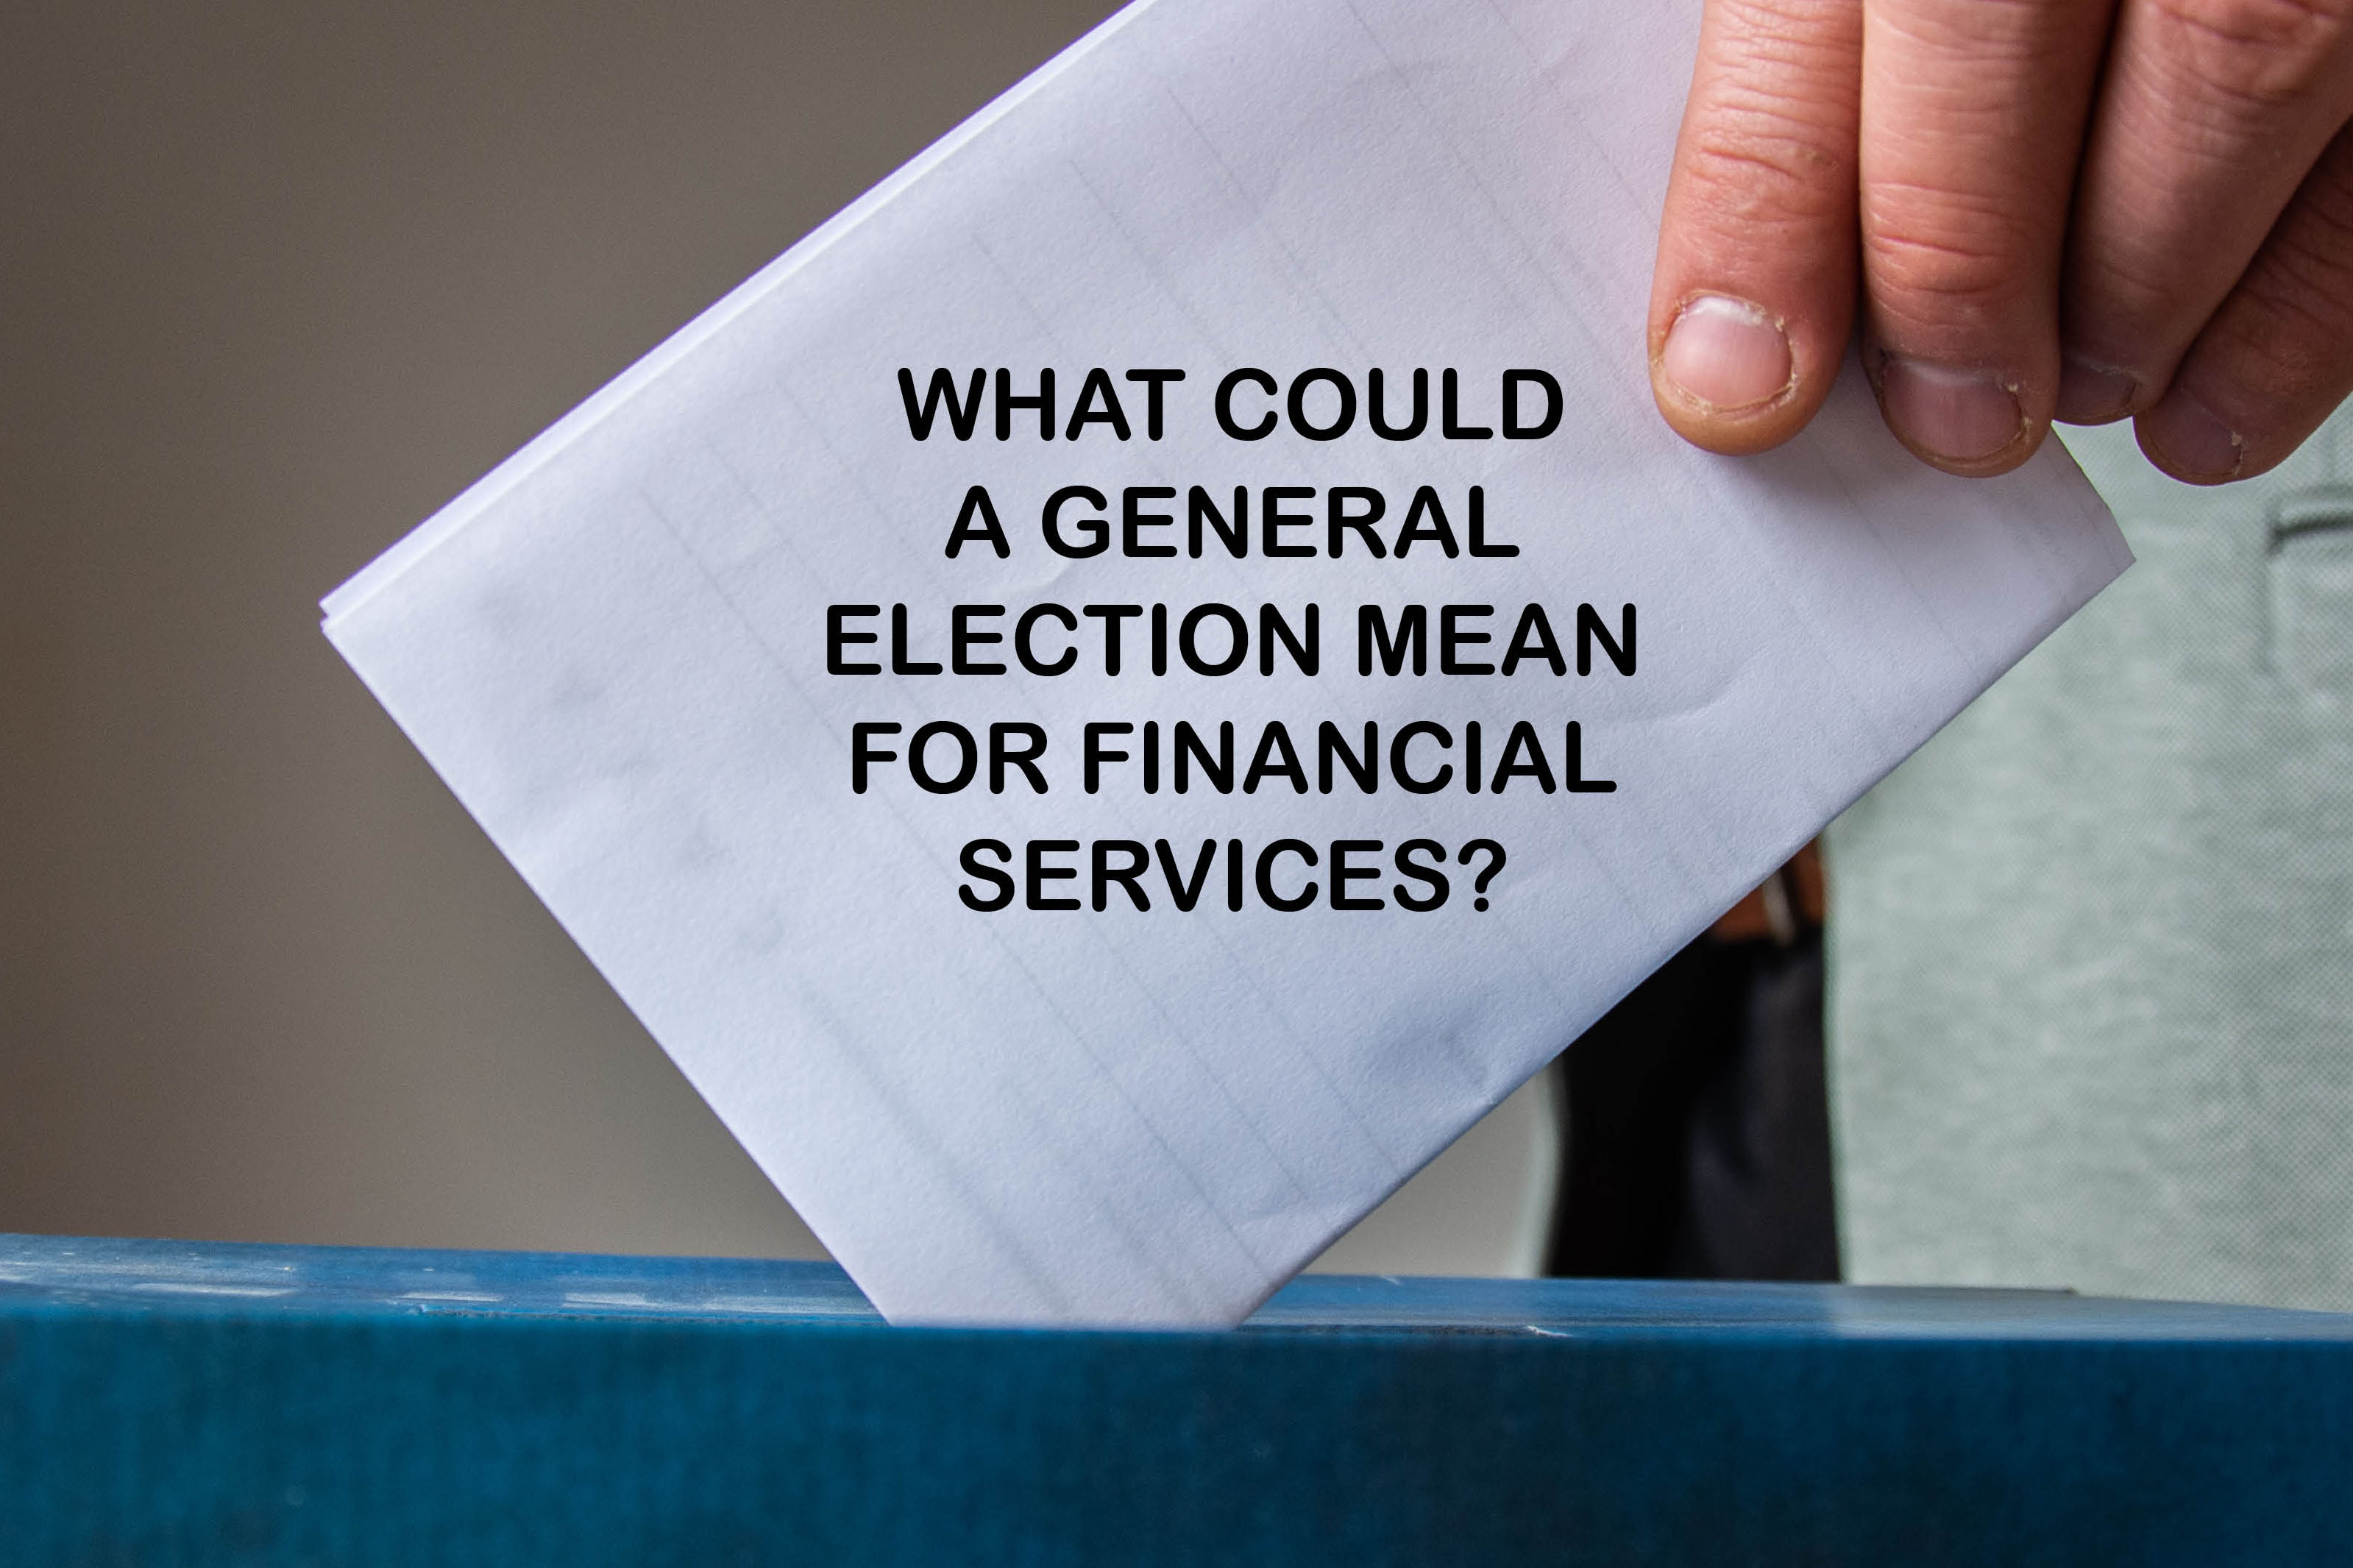 What will a General Election mean for financial services?